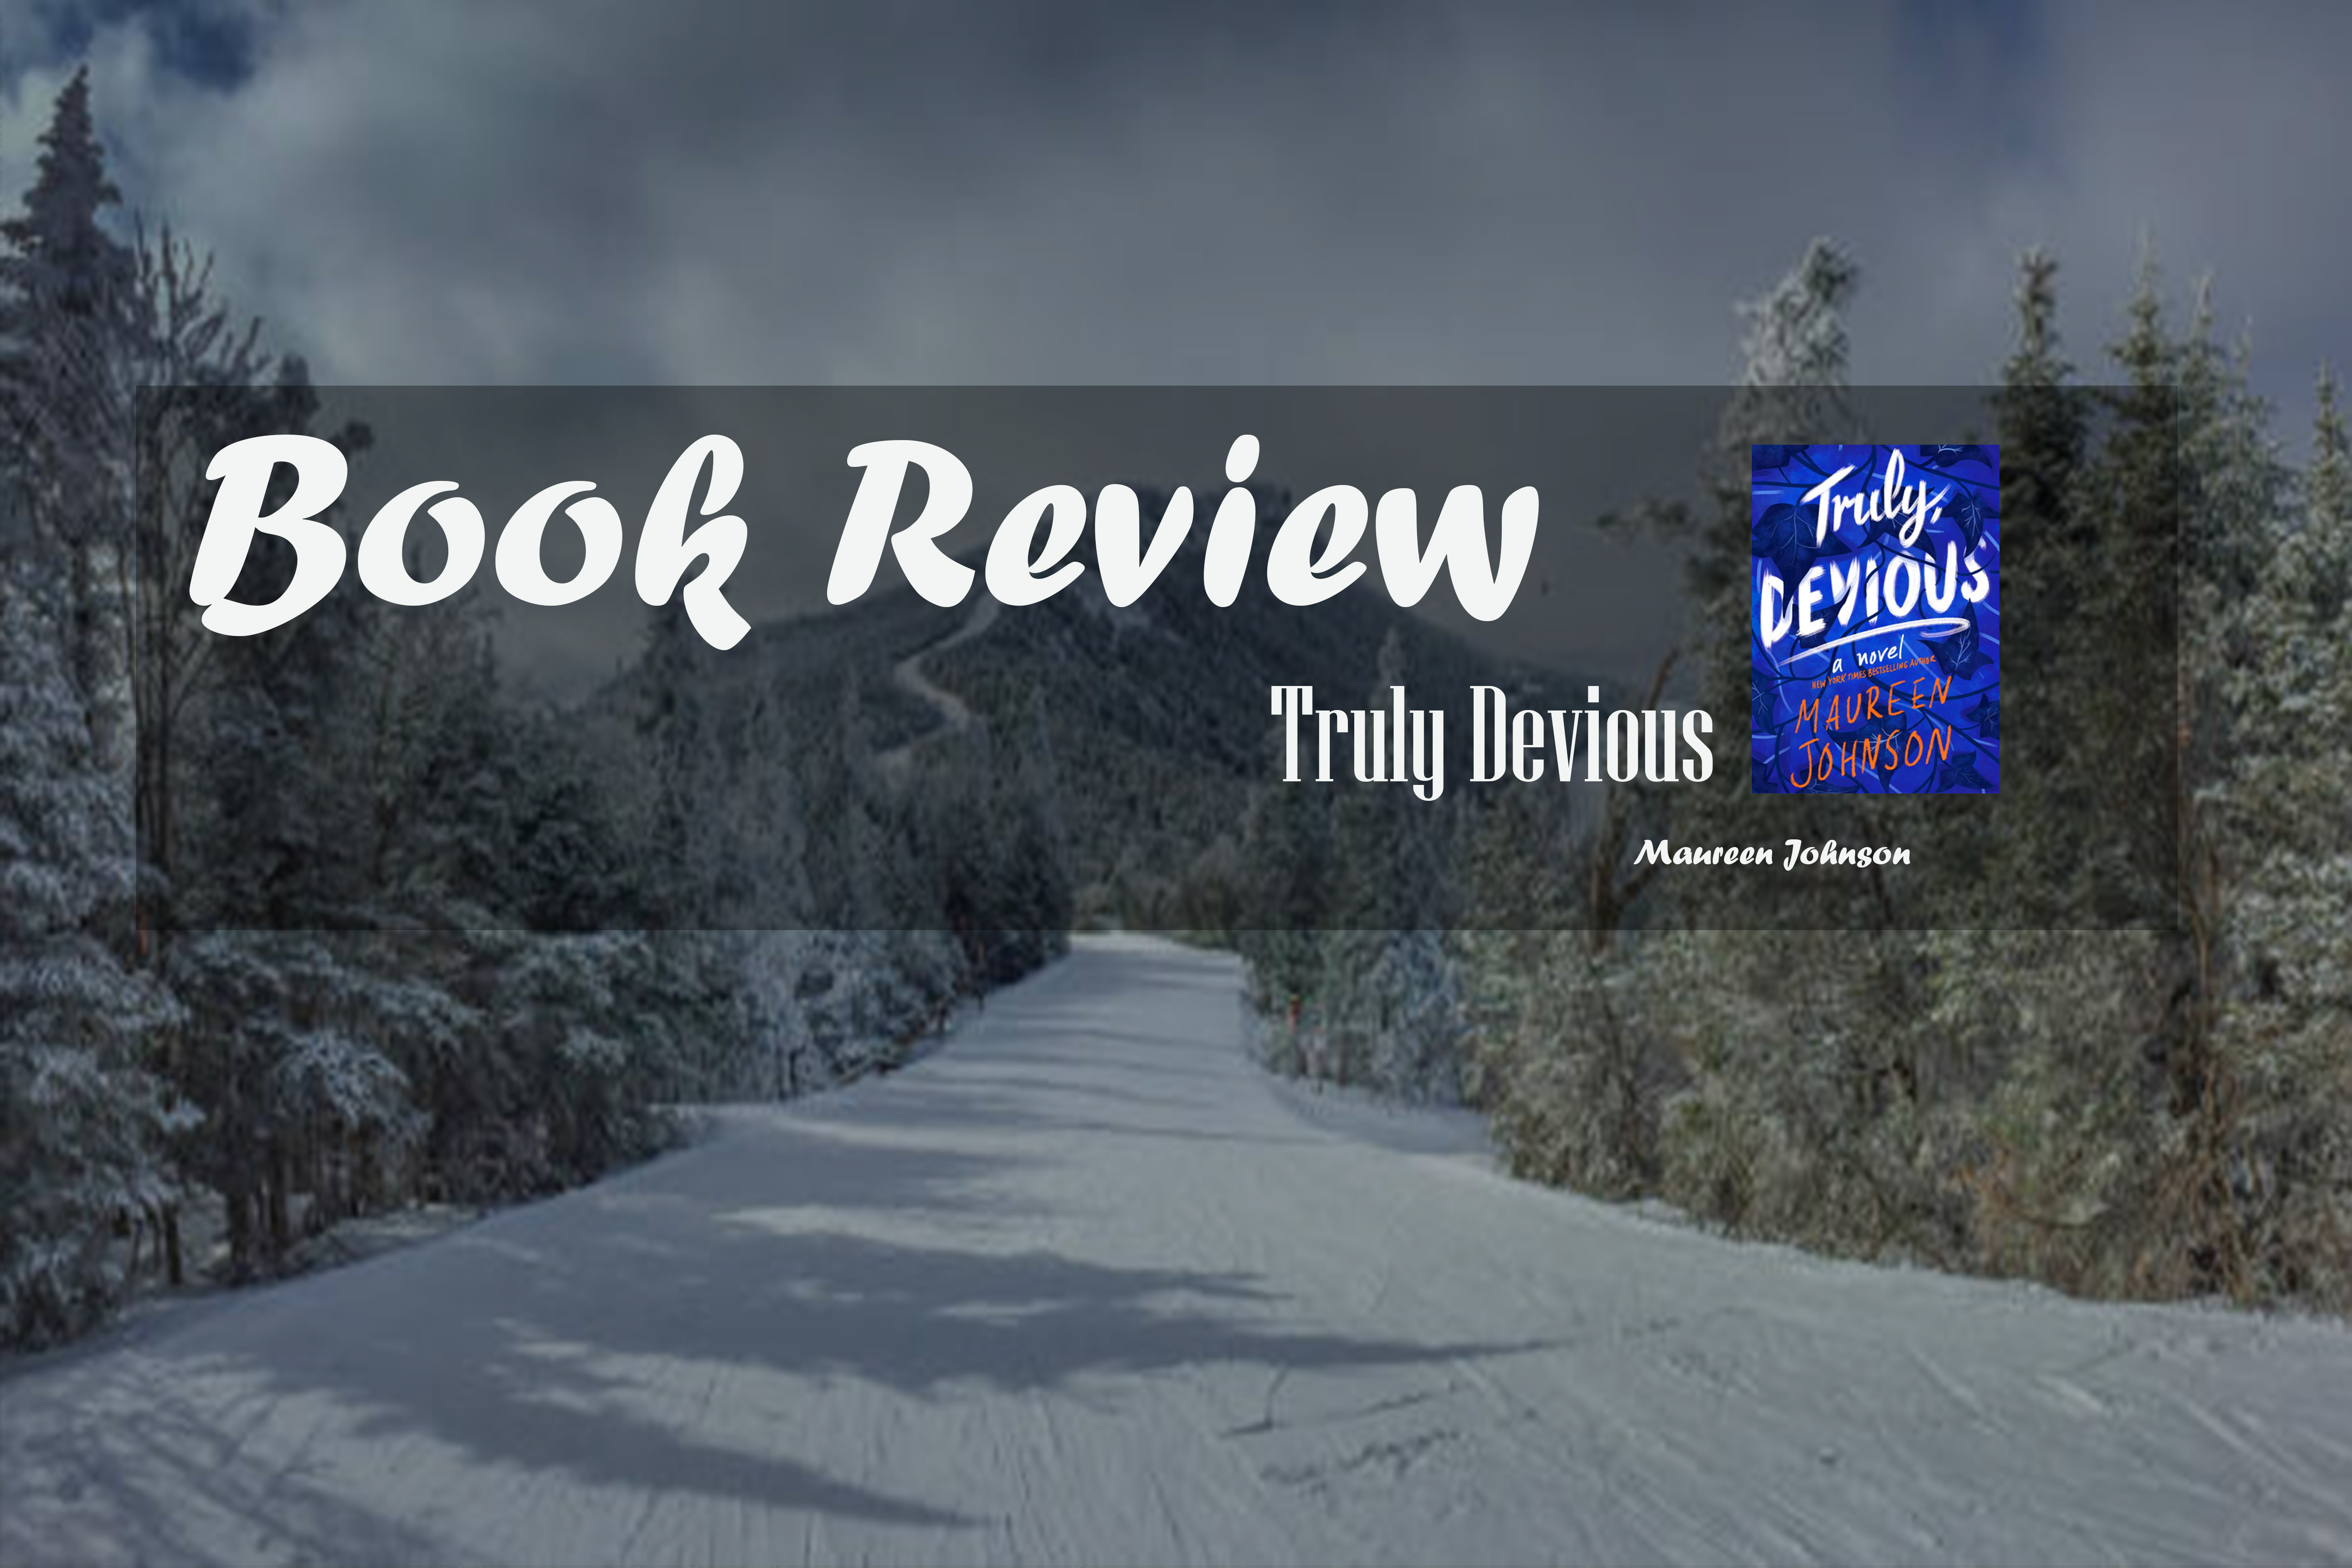 Book review: Truly Devious by Maureen Jonhson